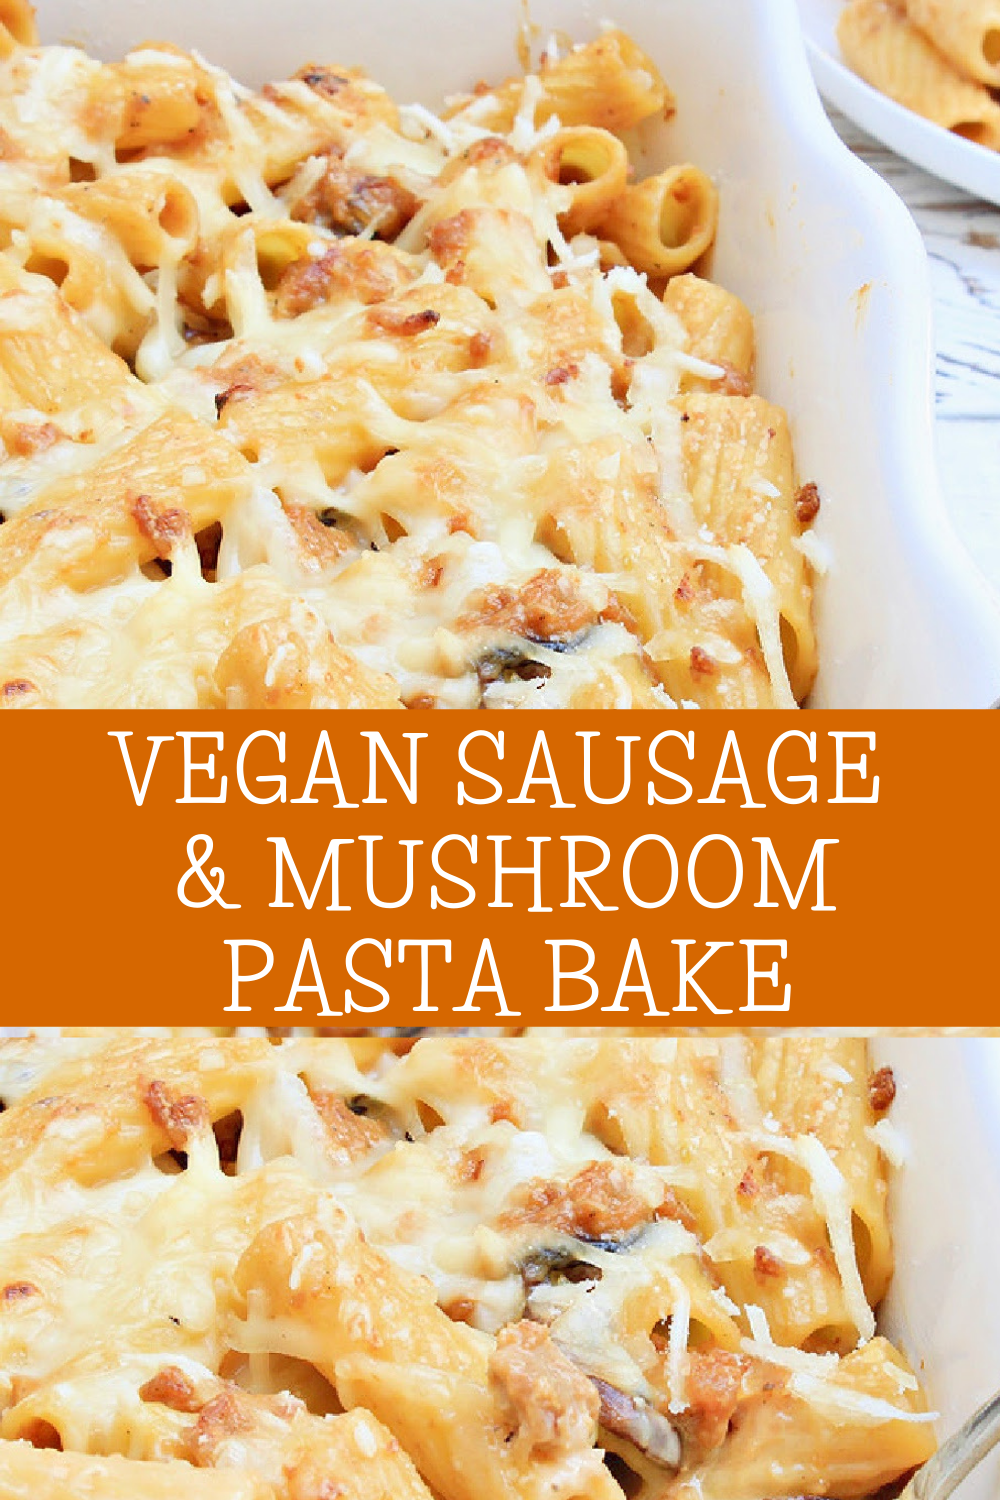 Vegan Sausage and Mushroom Pasta Bake ~ A hearty and comforting casserole made with sweet Italian sausage and mushrooms in a creamy, dairy-free white sauce. Ready to serve in about 30 minutes! via @thiswifecooks